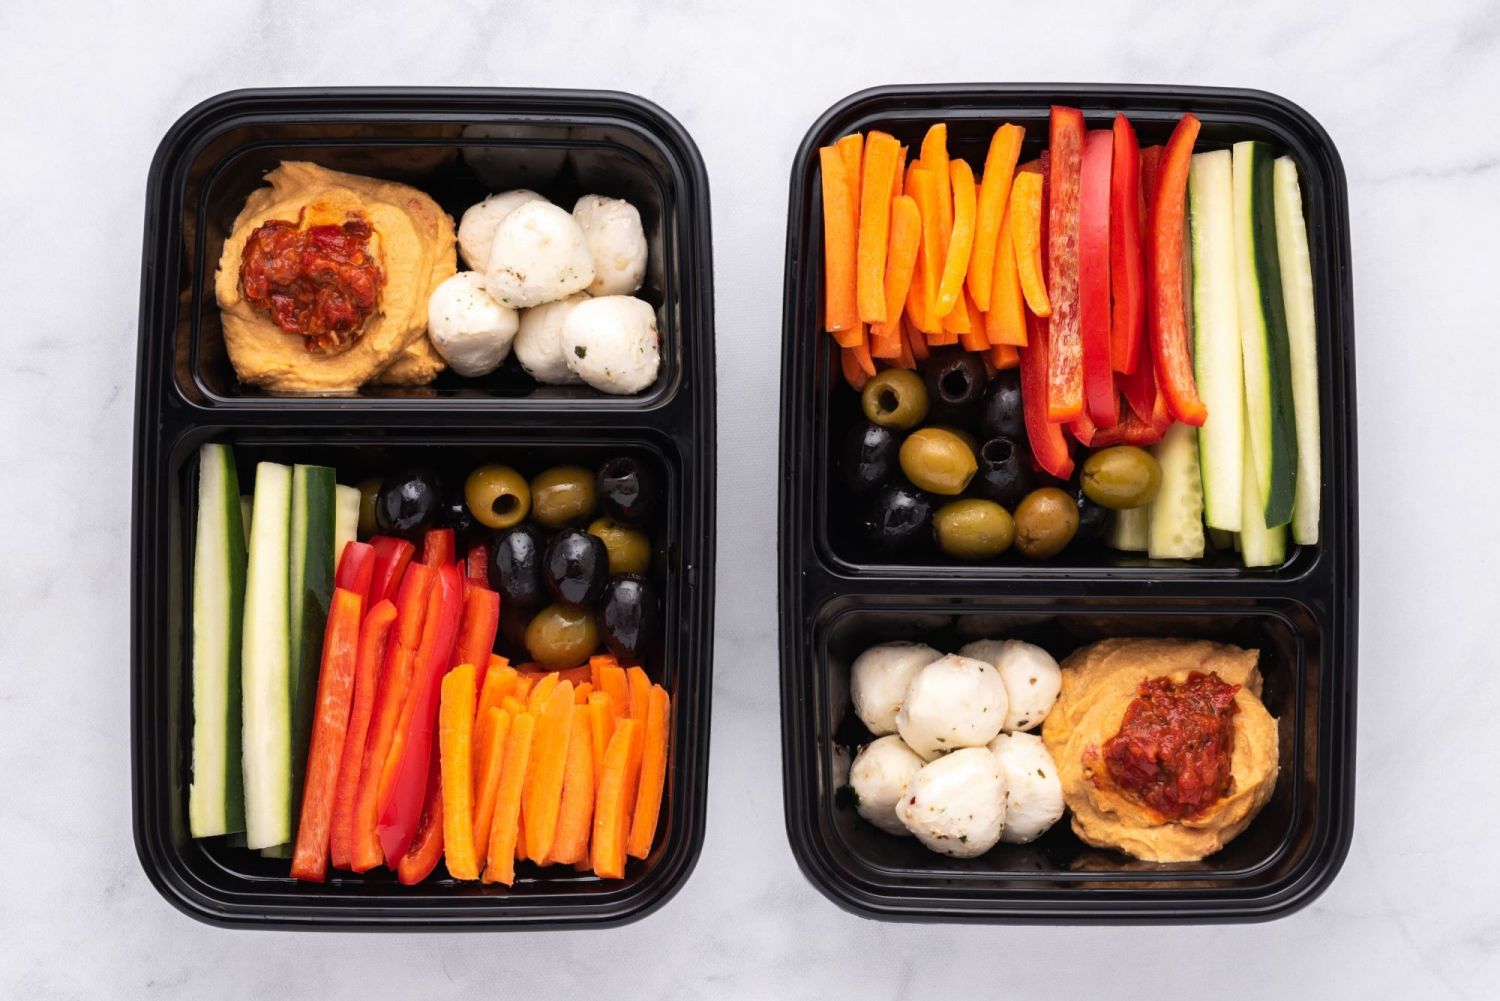 Two snack boxes packed with hummus, olives, vegetables, and cheese.